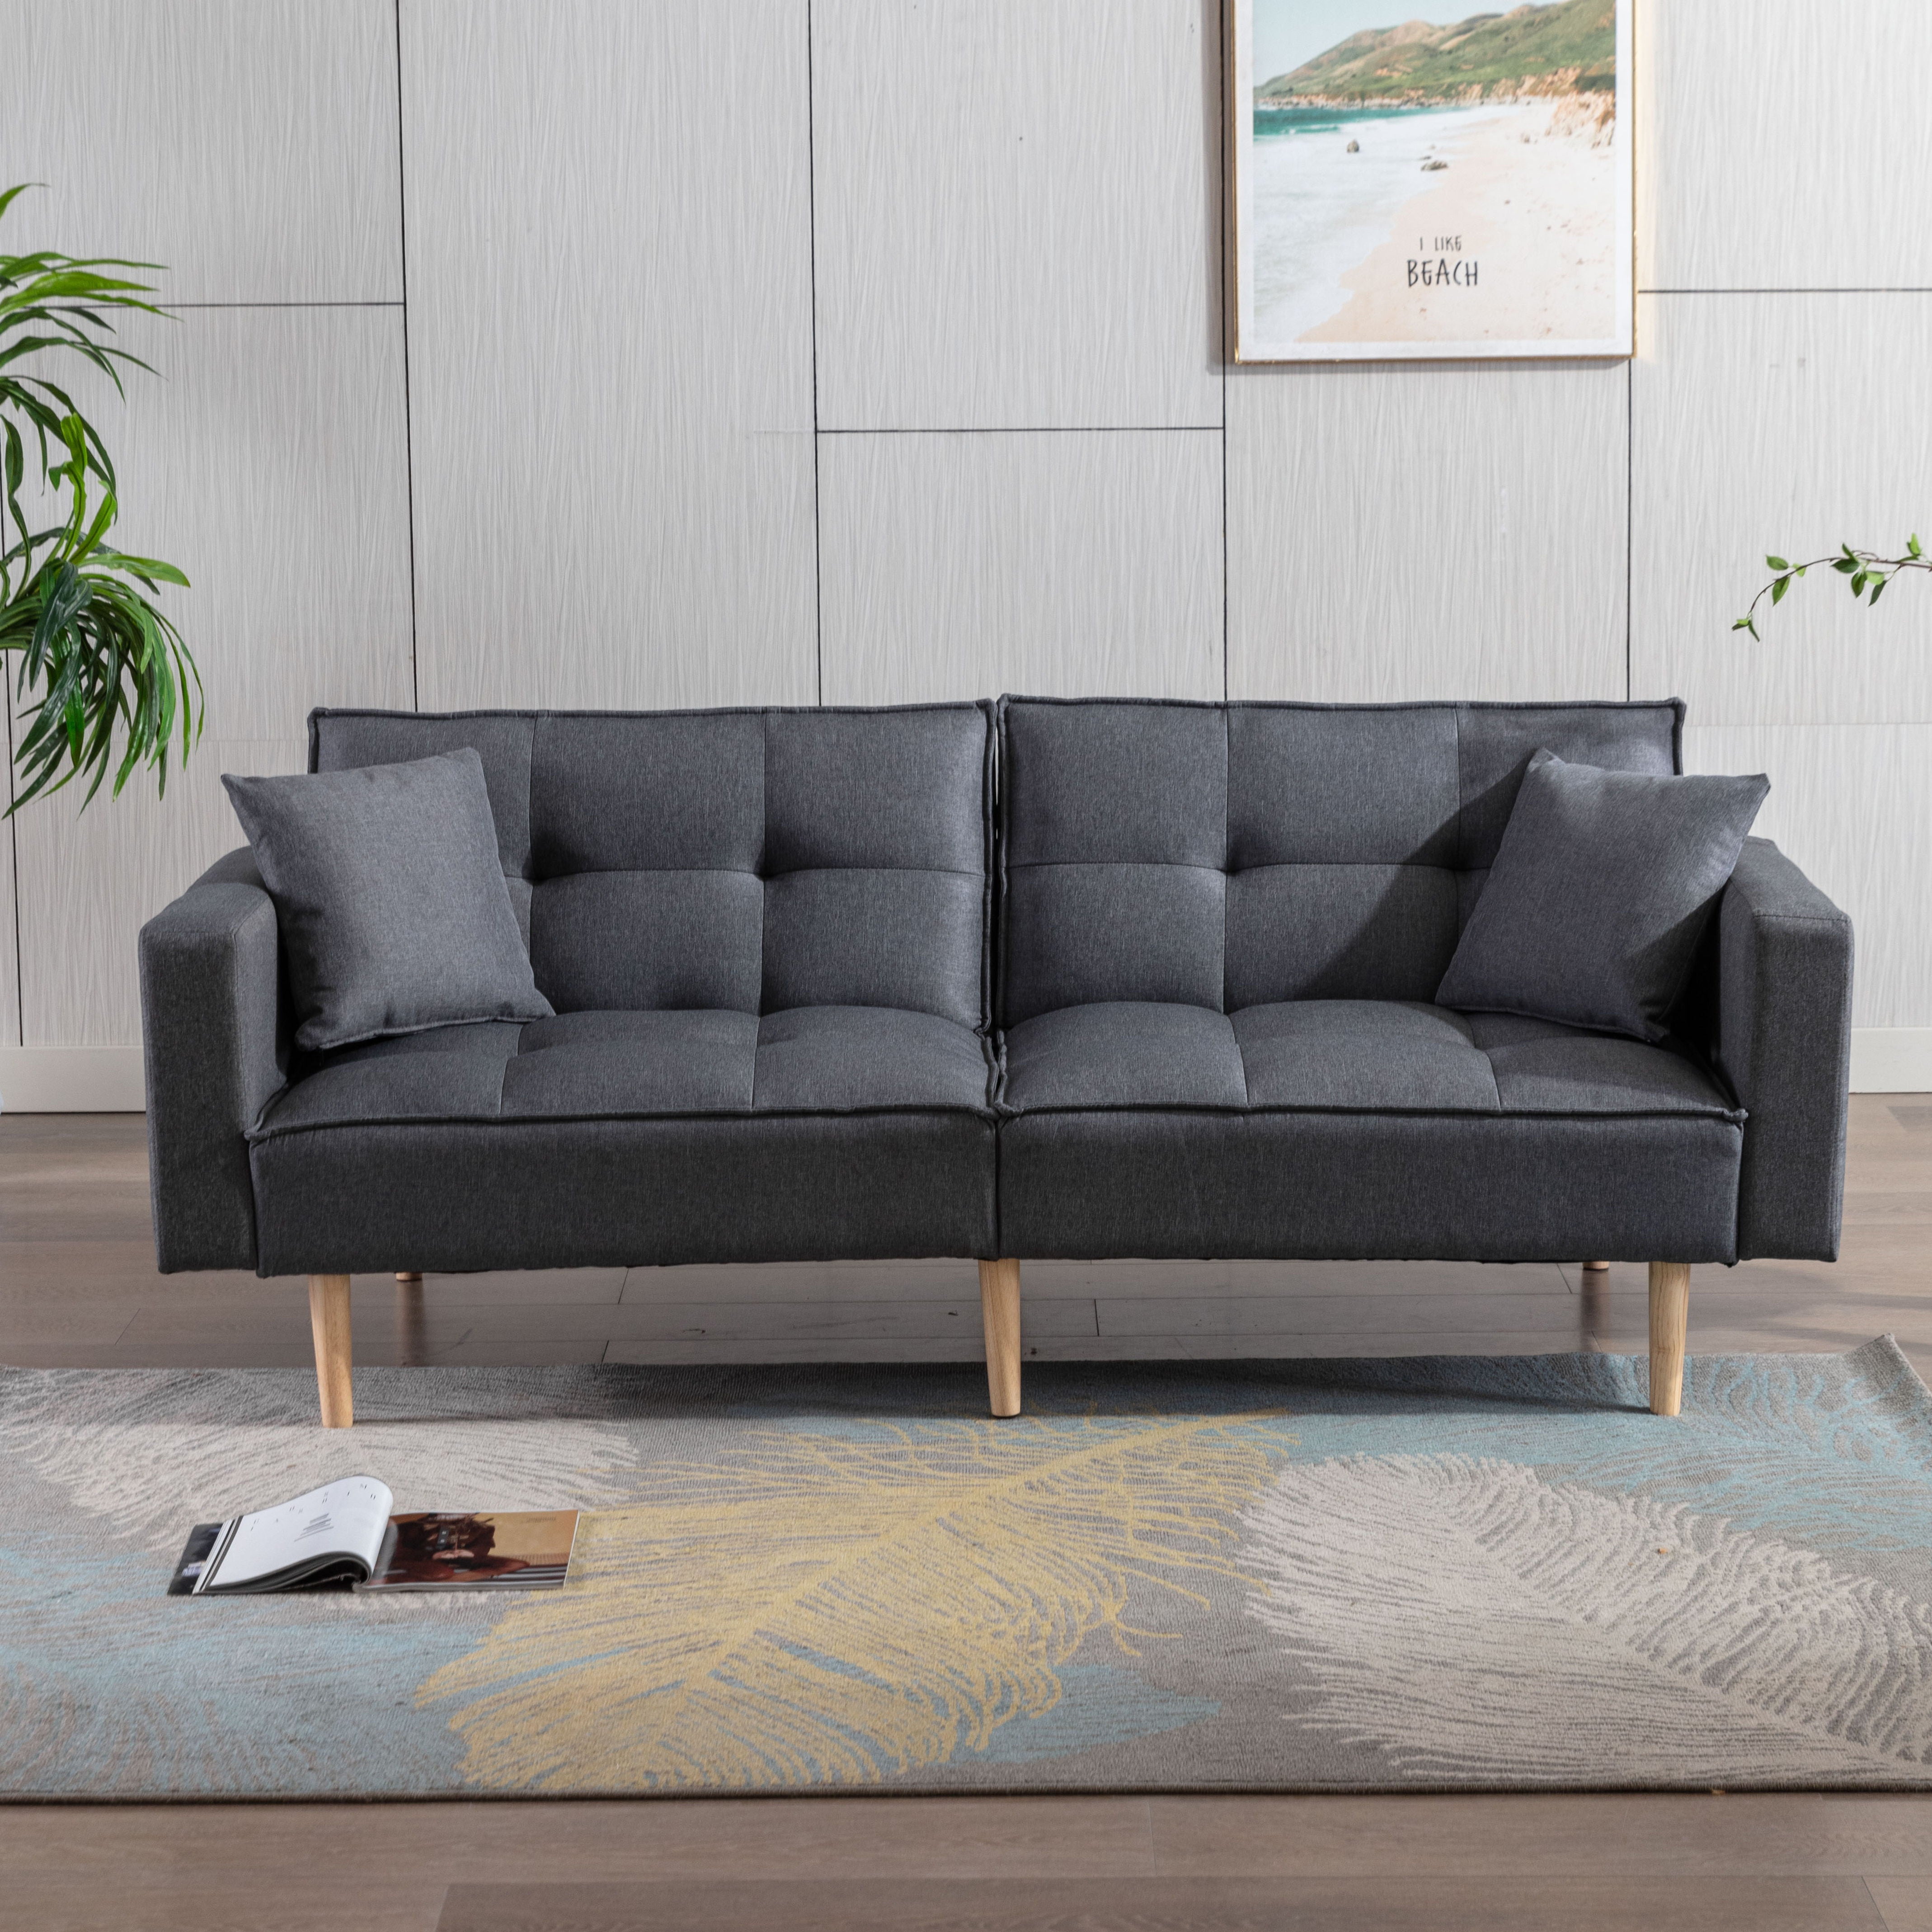 Dongheng Convertible Futon Sofa Bed For Living Room, Linen Sofa With Solid Wooden Legs, Dark Gray